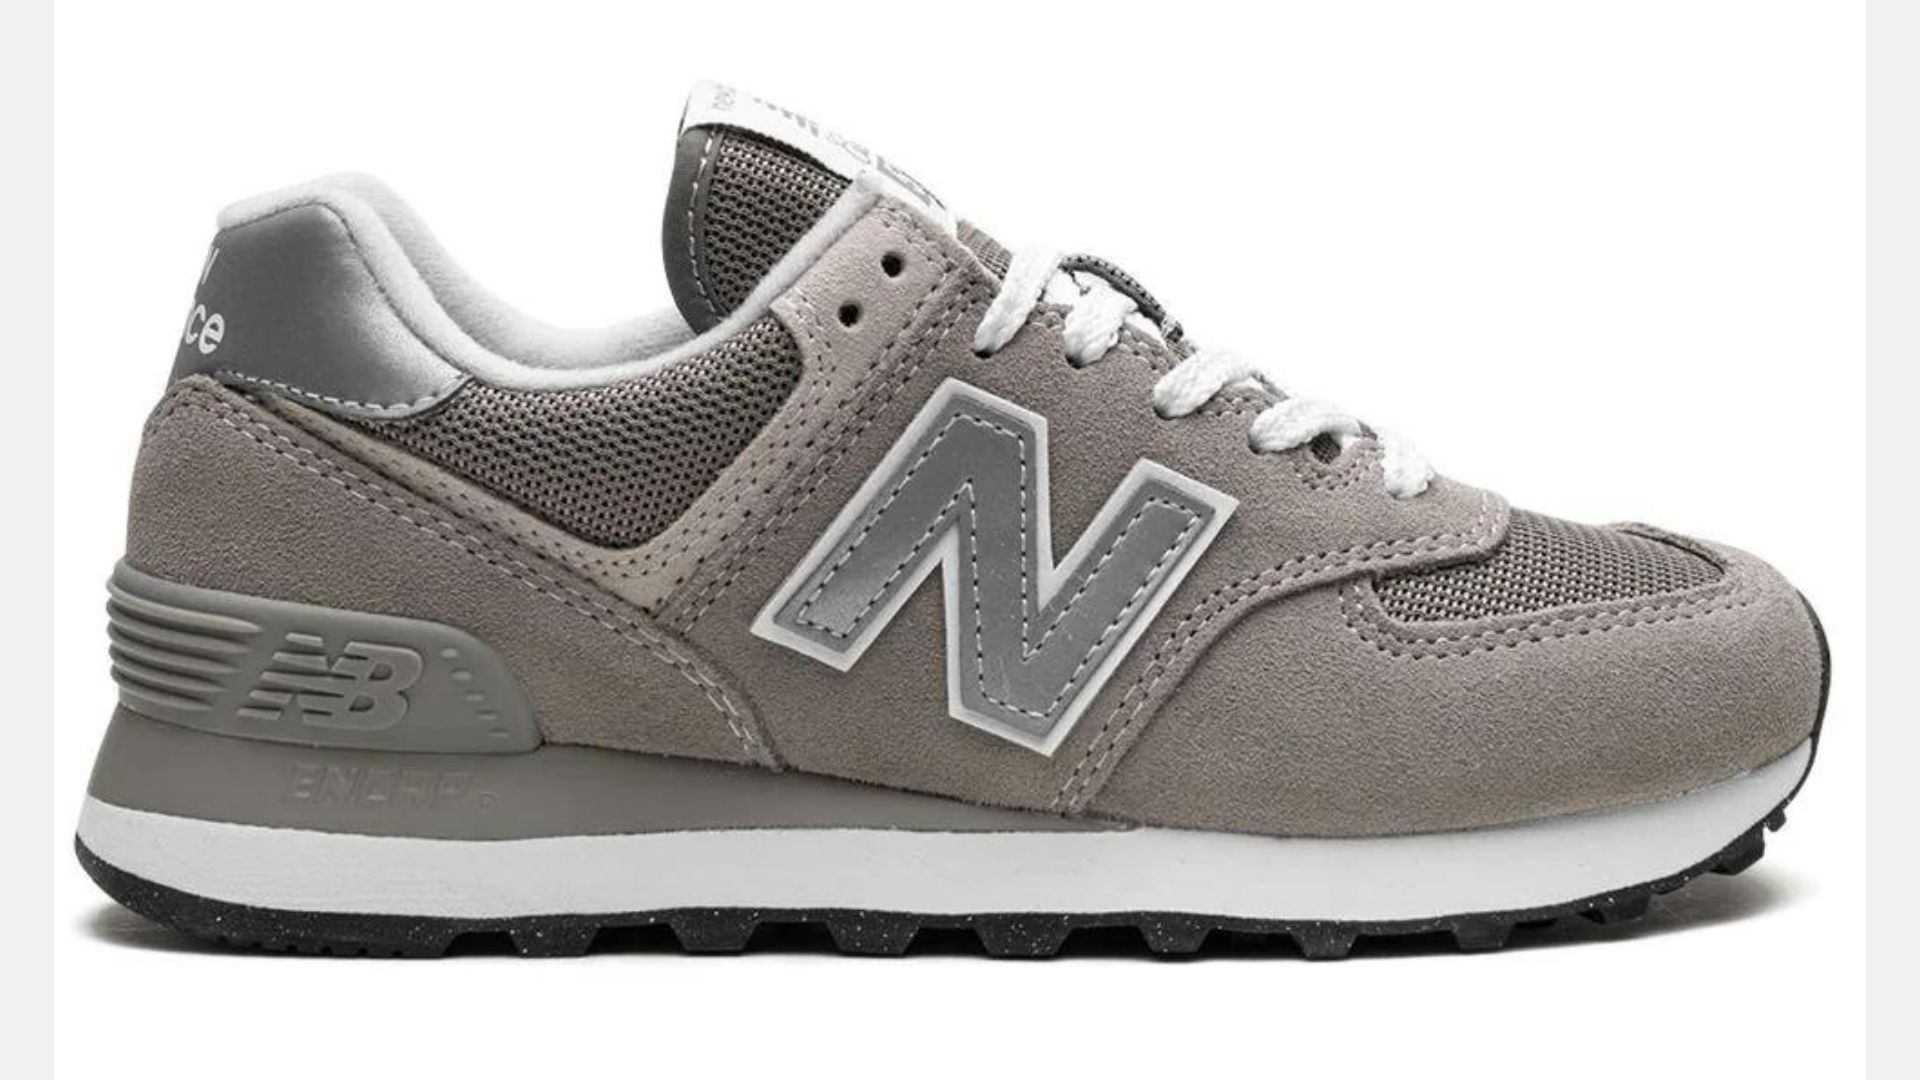 iconic New Balance sneakers that live up to the hype